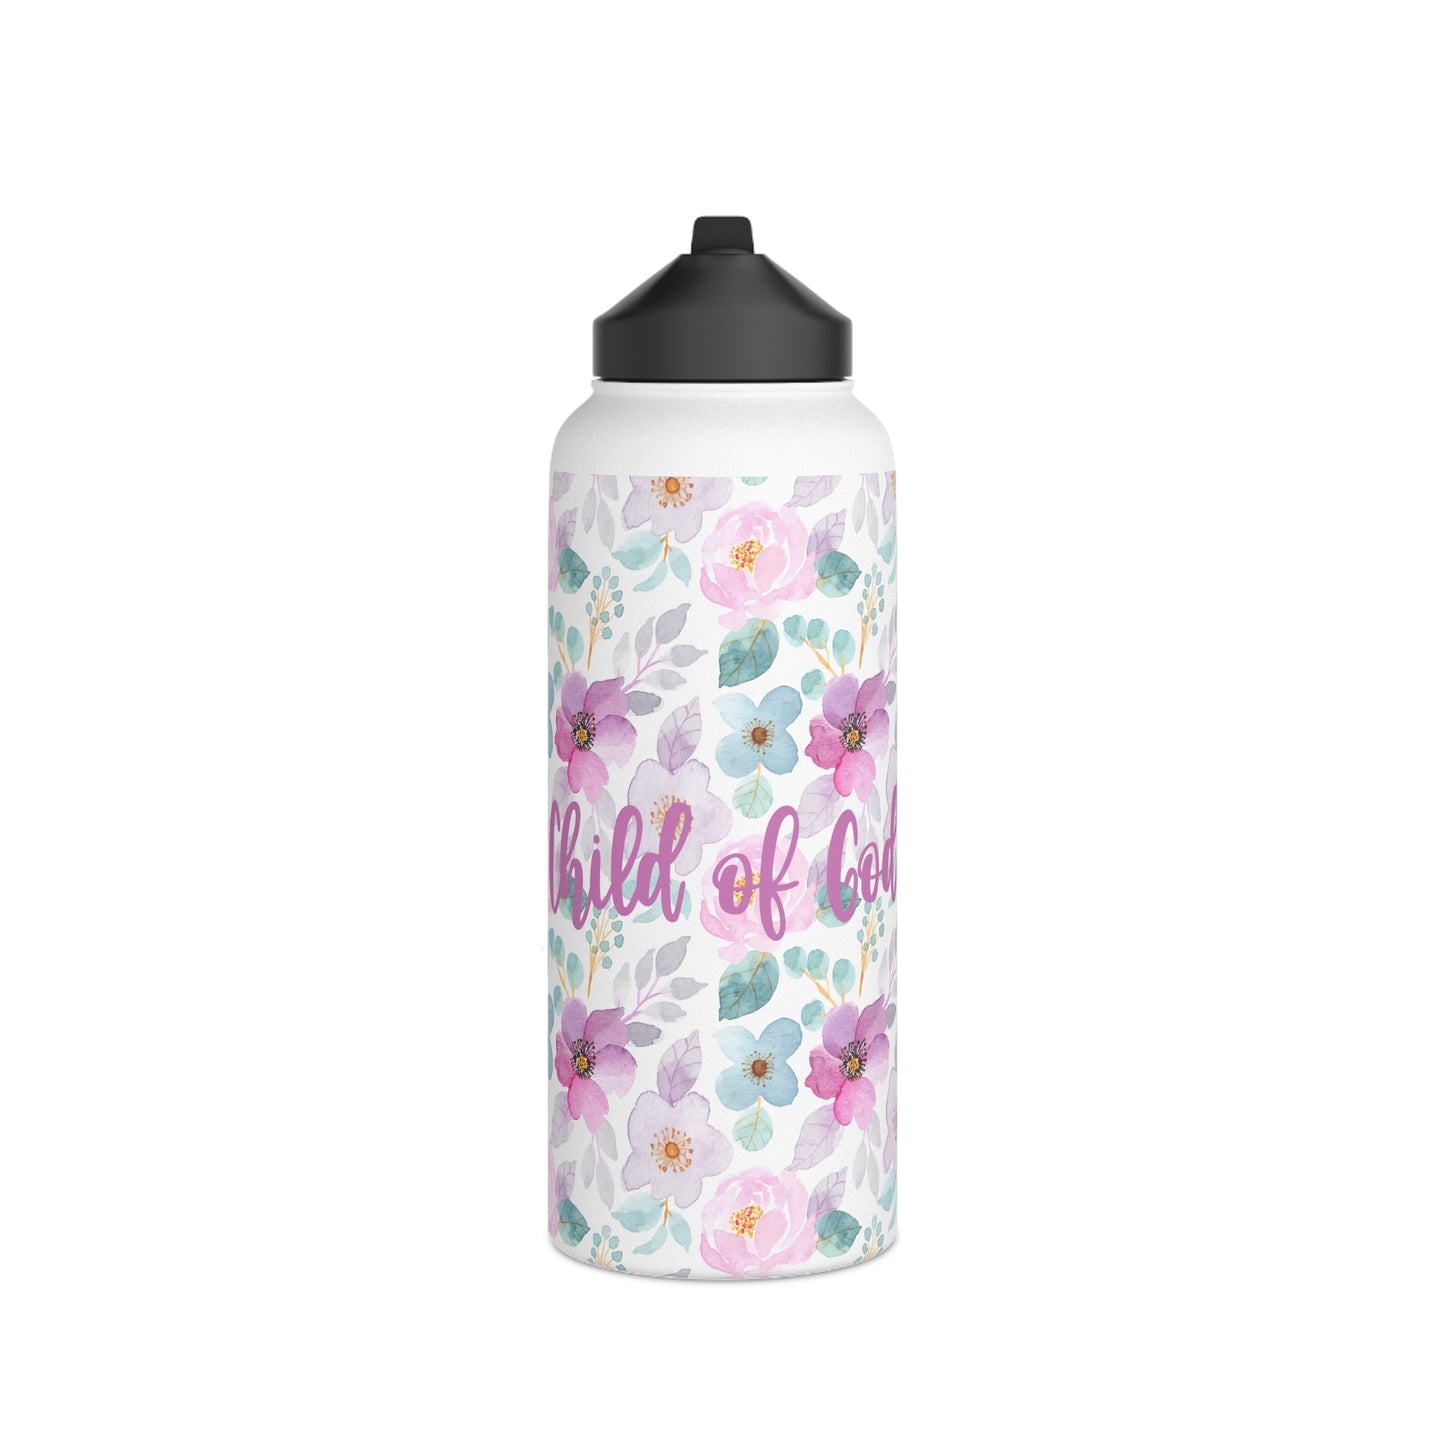 Floral Child of God Stainless Steel Water Bottle - Friends of the Faith